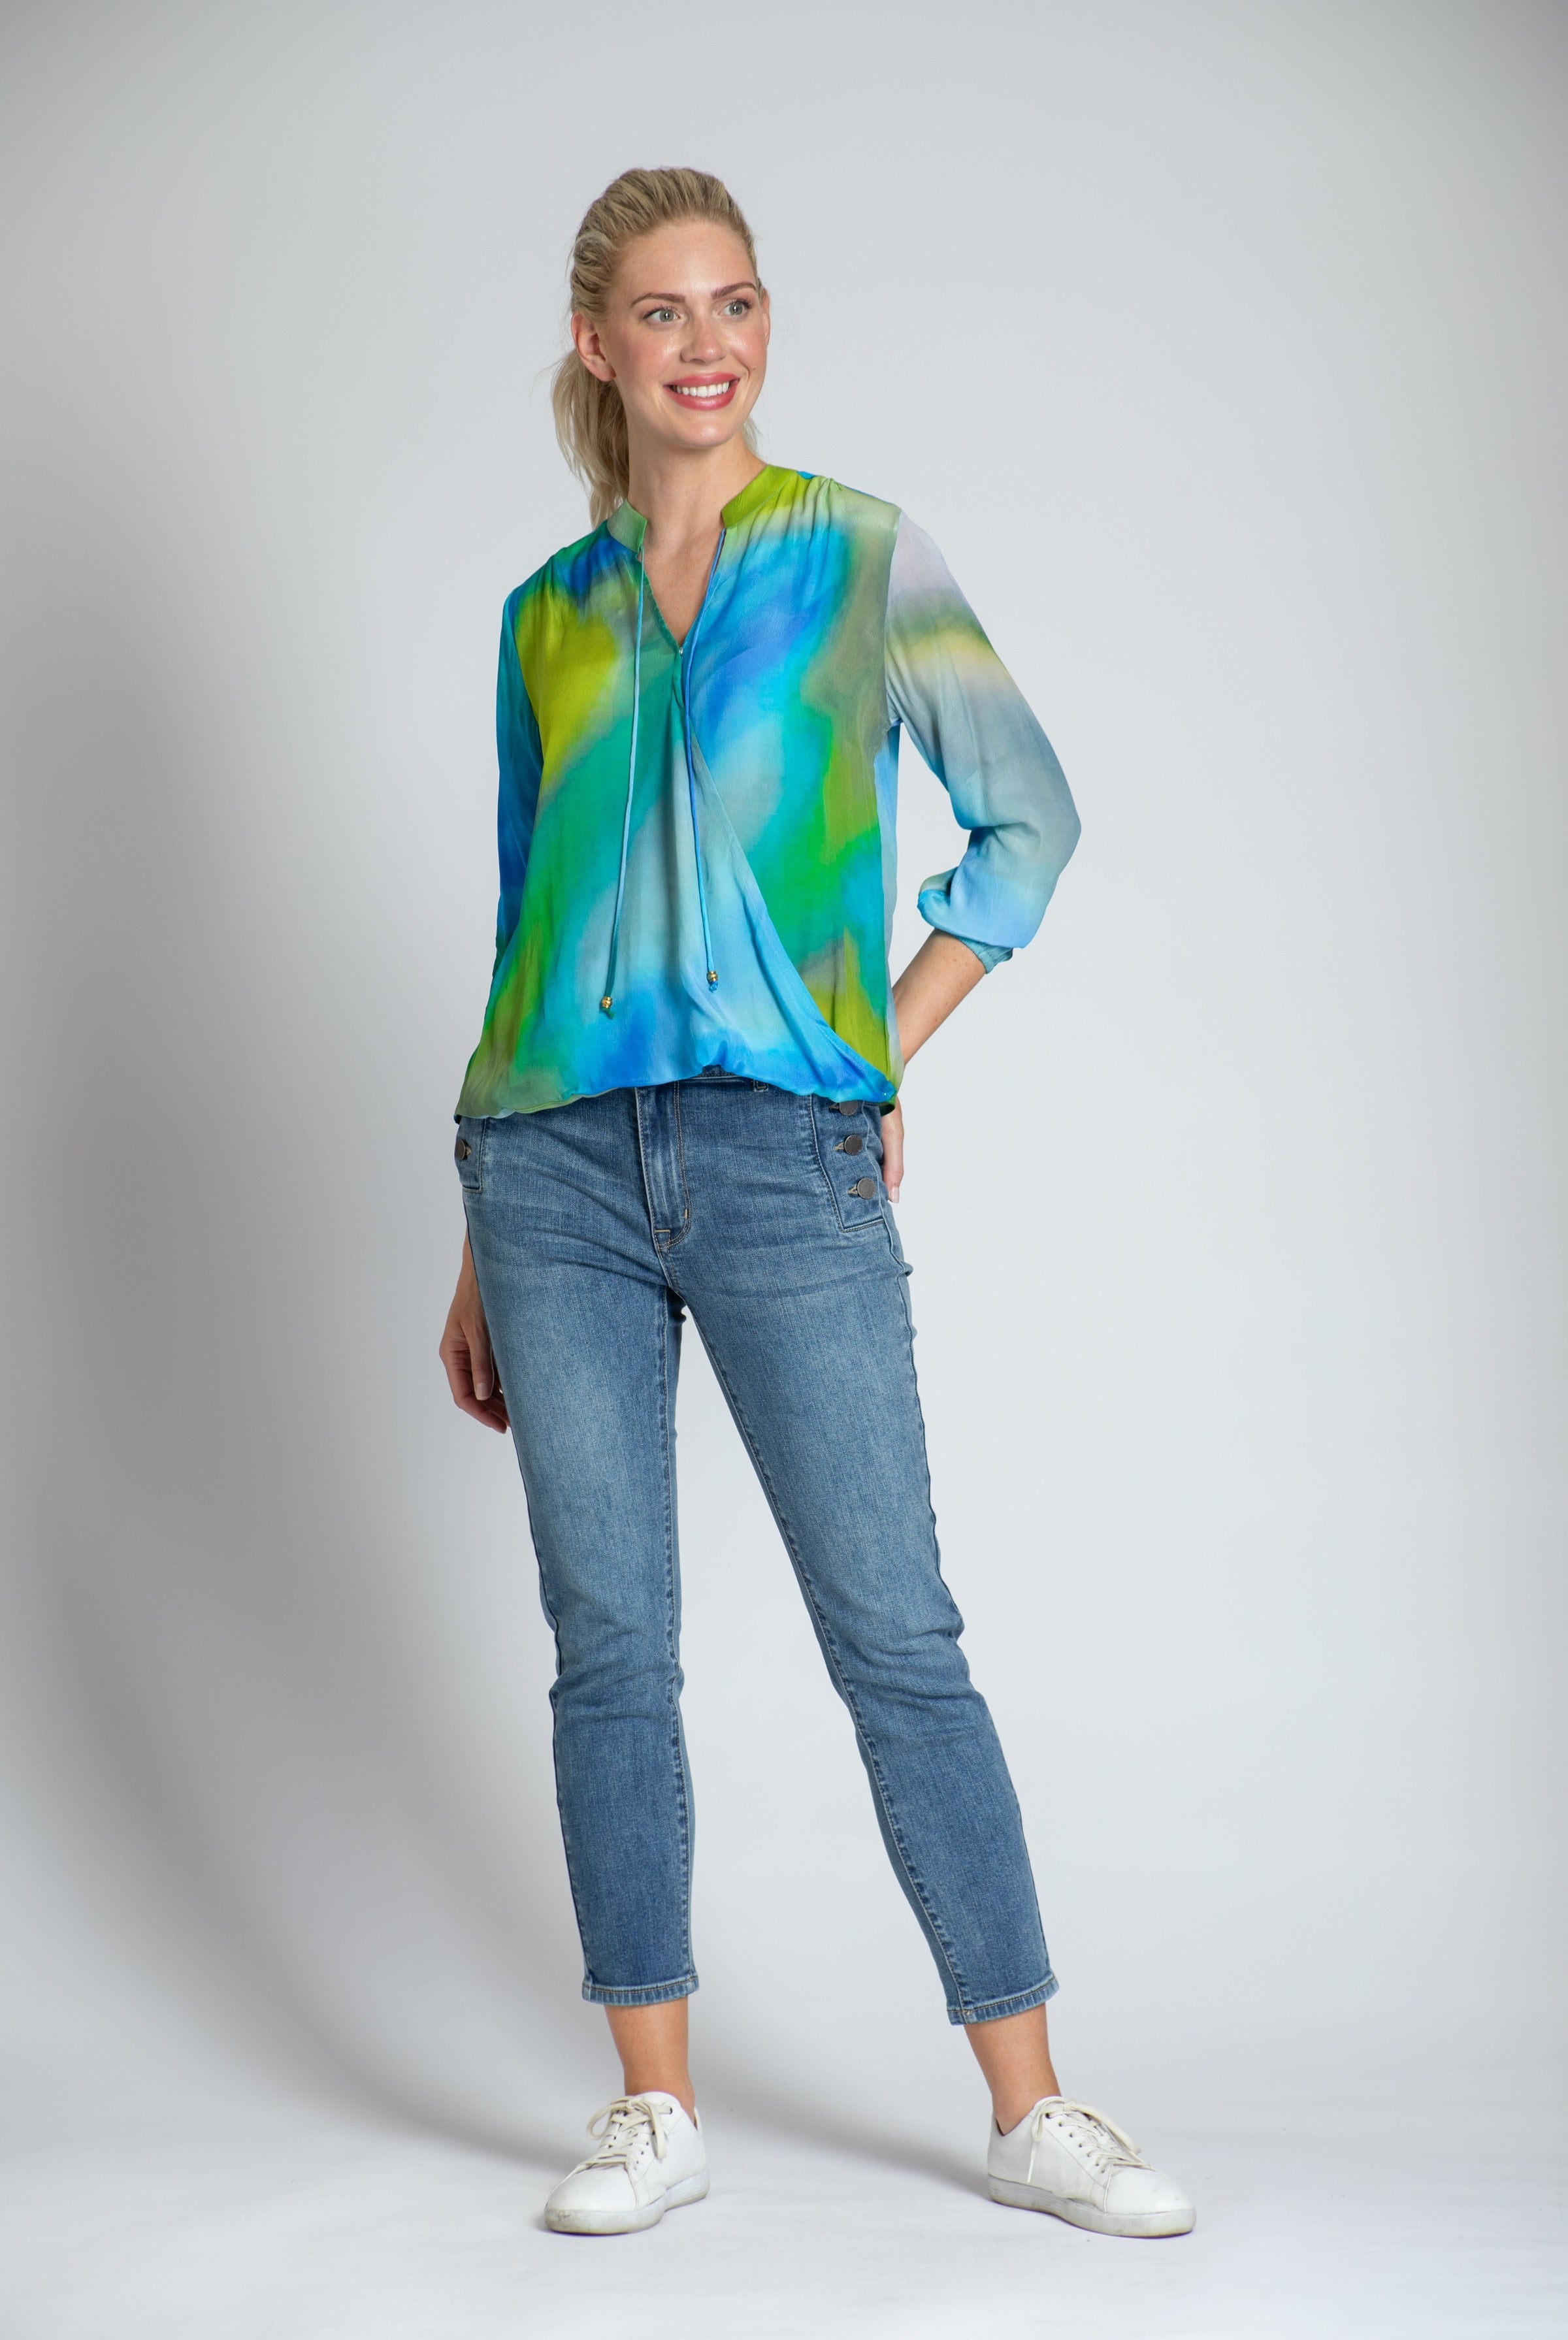 Blue/Lime Ombre Print - Crossover Top With Tassel